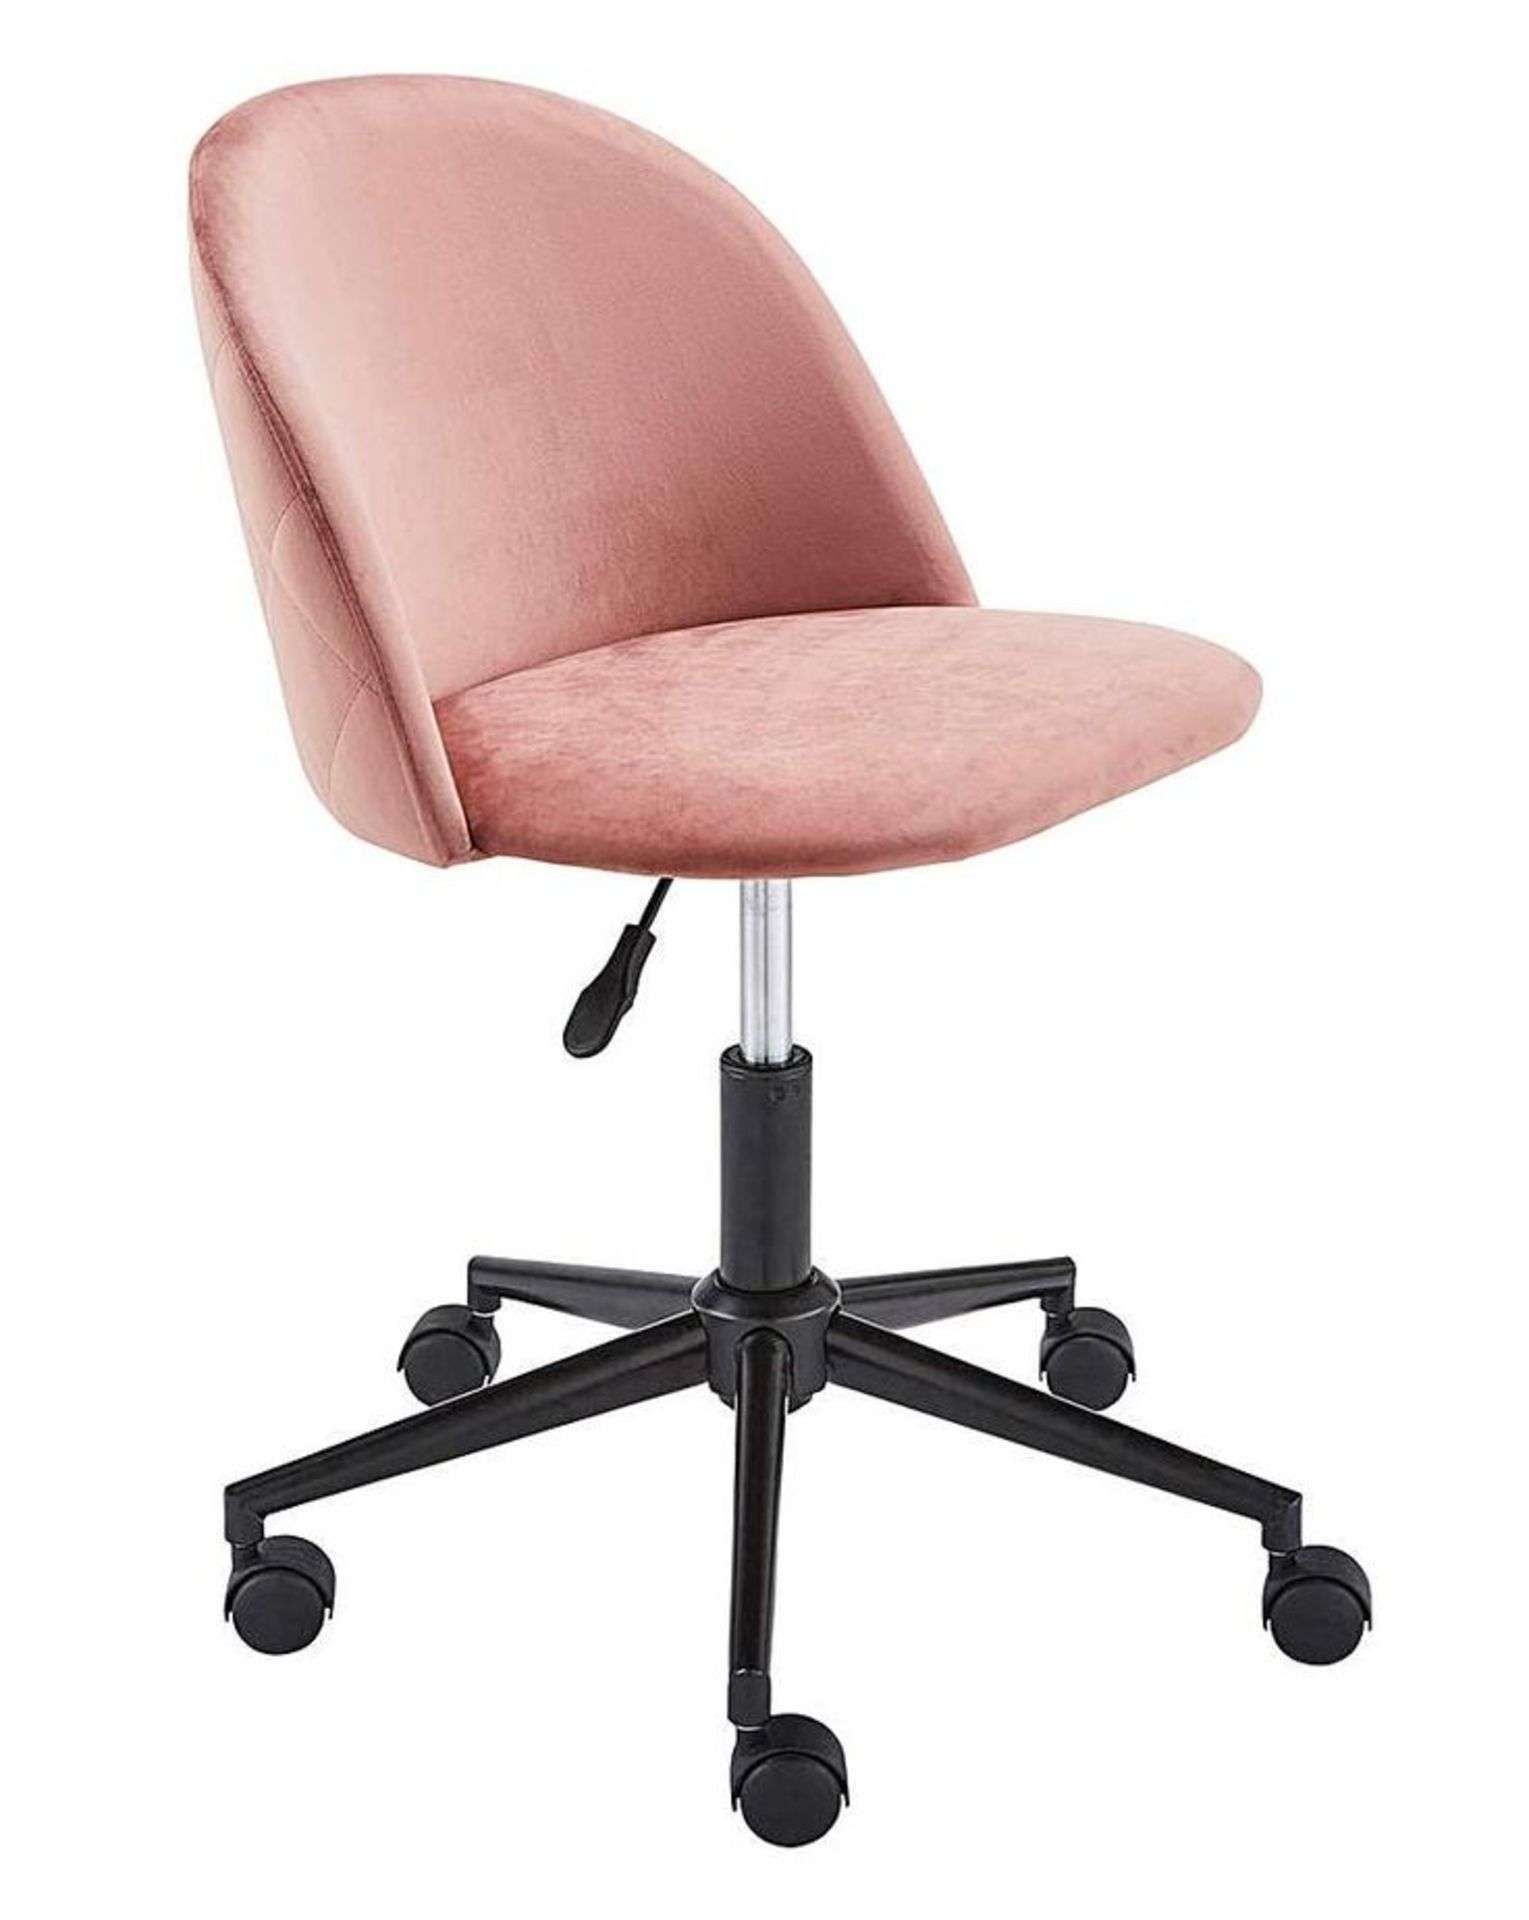 Brand New & Boxed Klara Office Chair - Blush. RRP £199 each. The Klara Office Chair is a luxurious